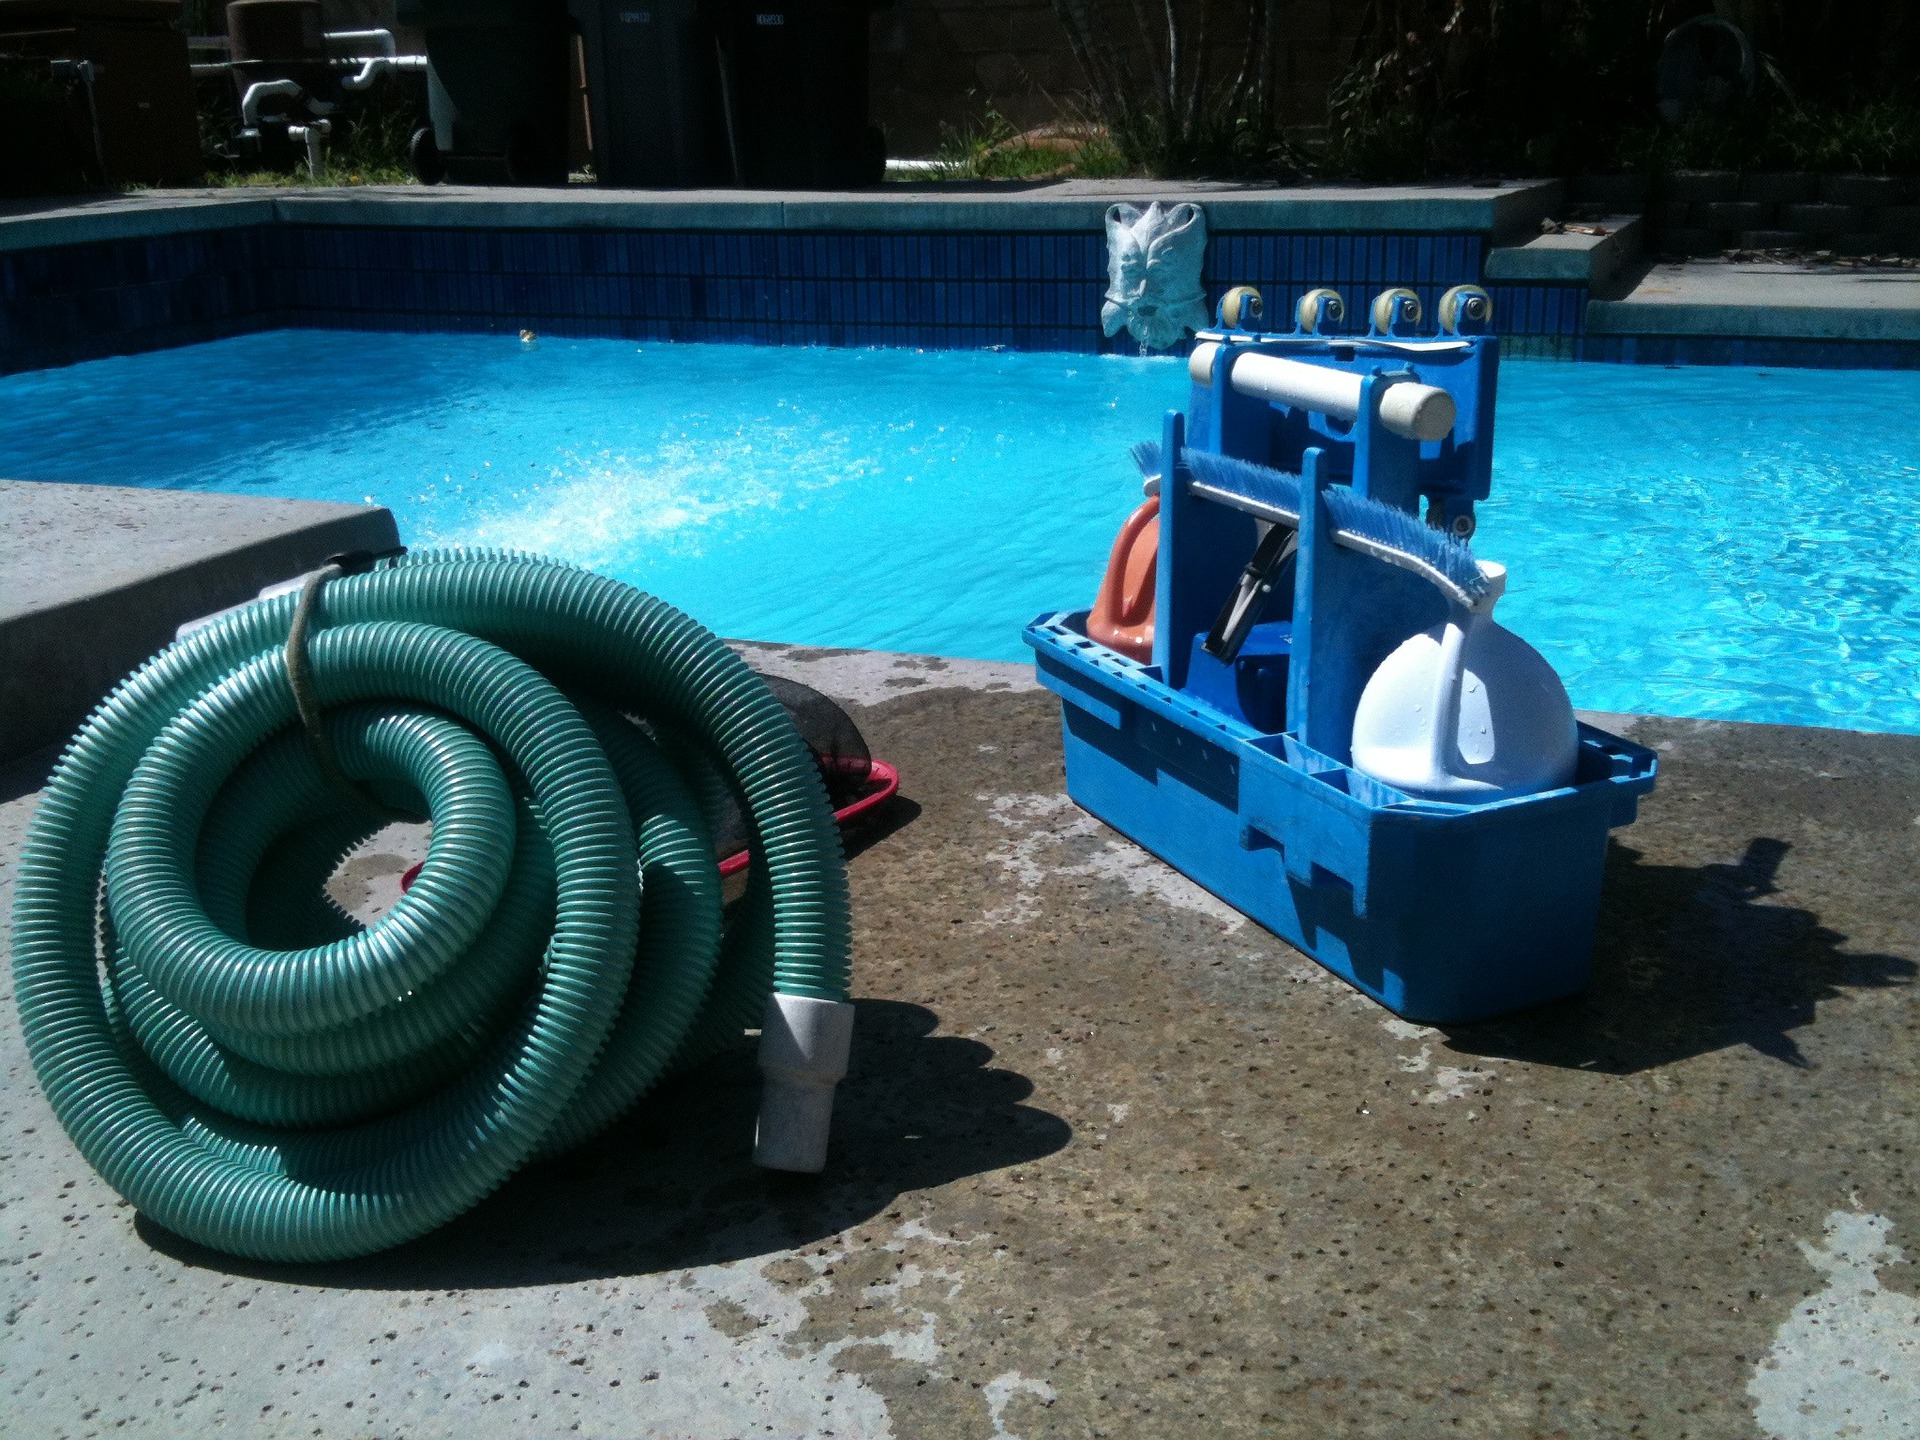 Pool Service Route For Sale in New York